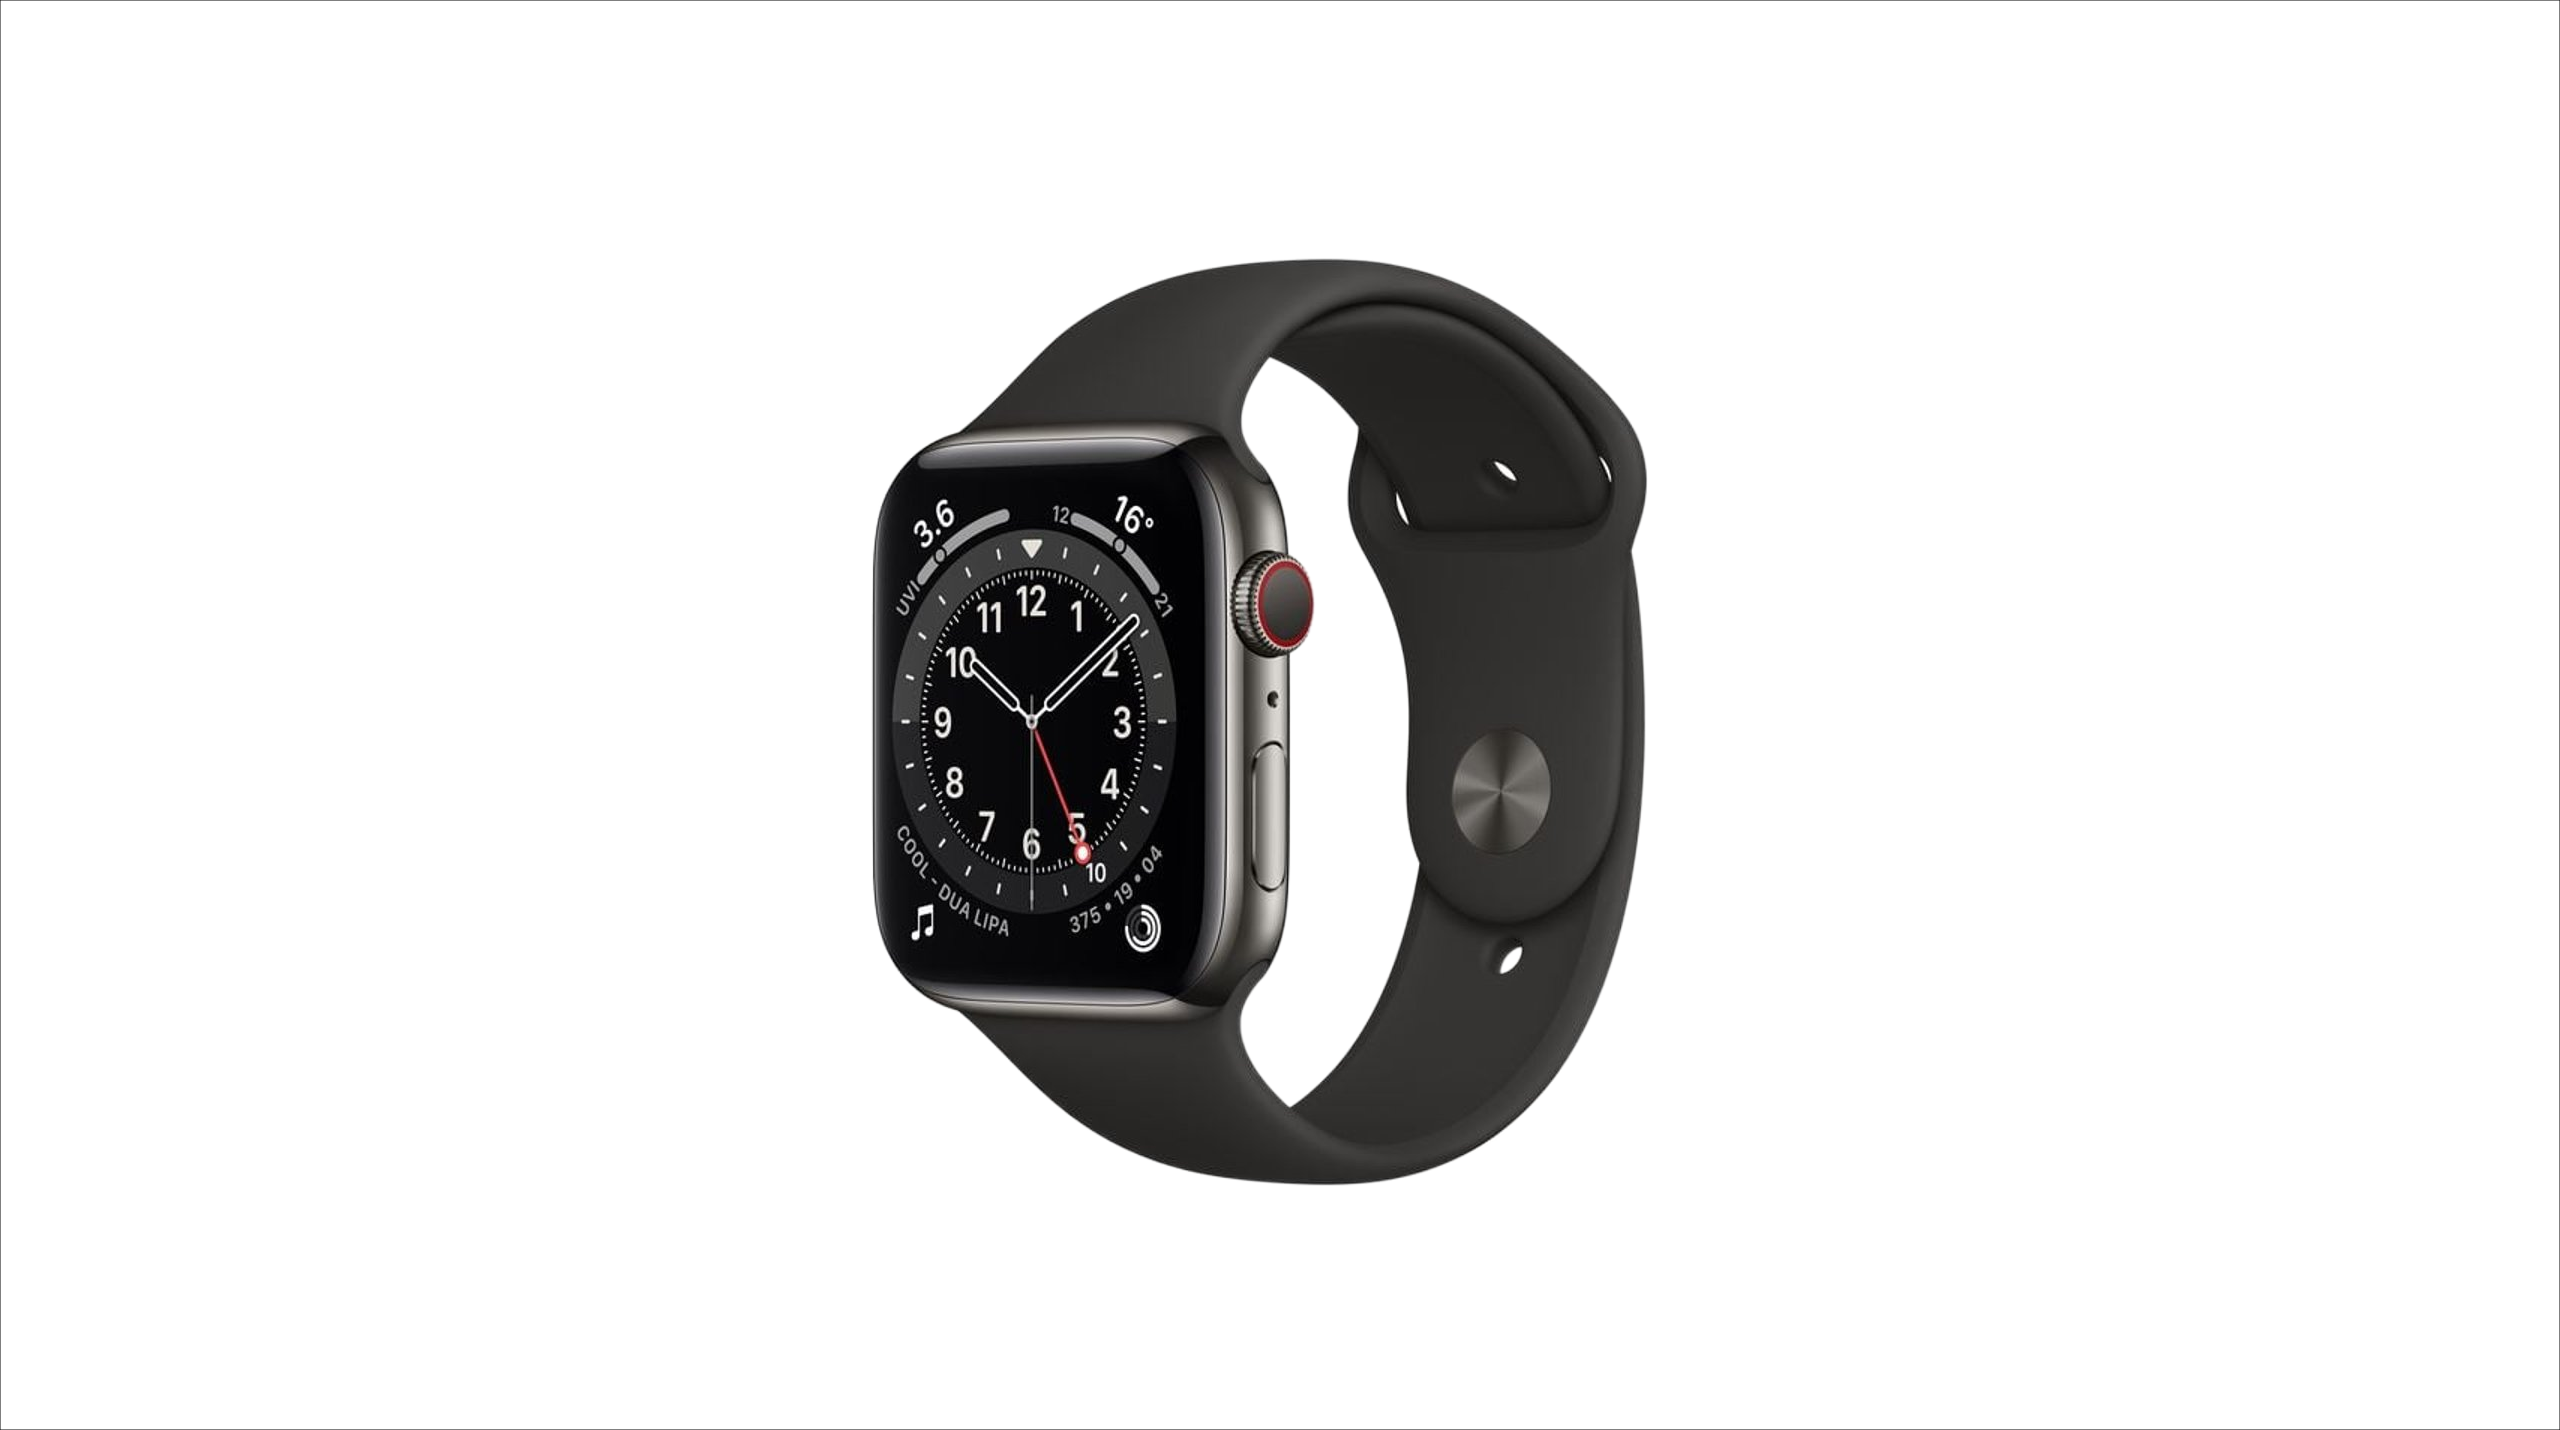 APPLE WATCH SERIES 6 GPS + CELLULAR, 40MM GRAPHITE STAINLESS STEEL CASE WITH BLACK SPORT BAND - REGULAR